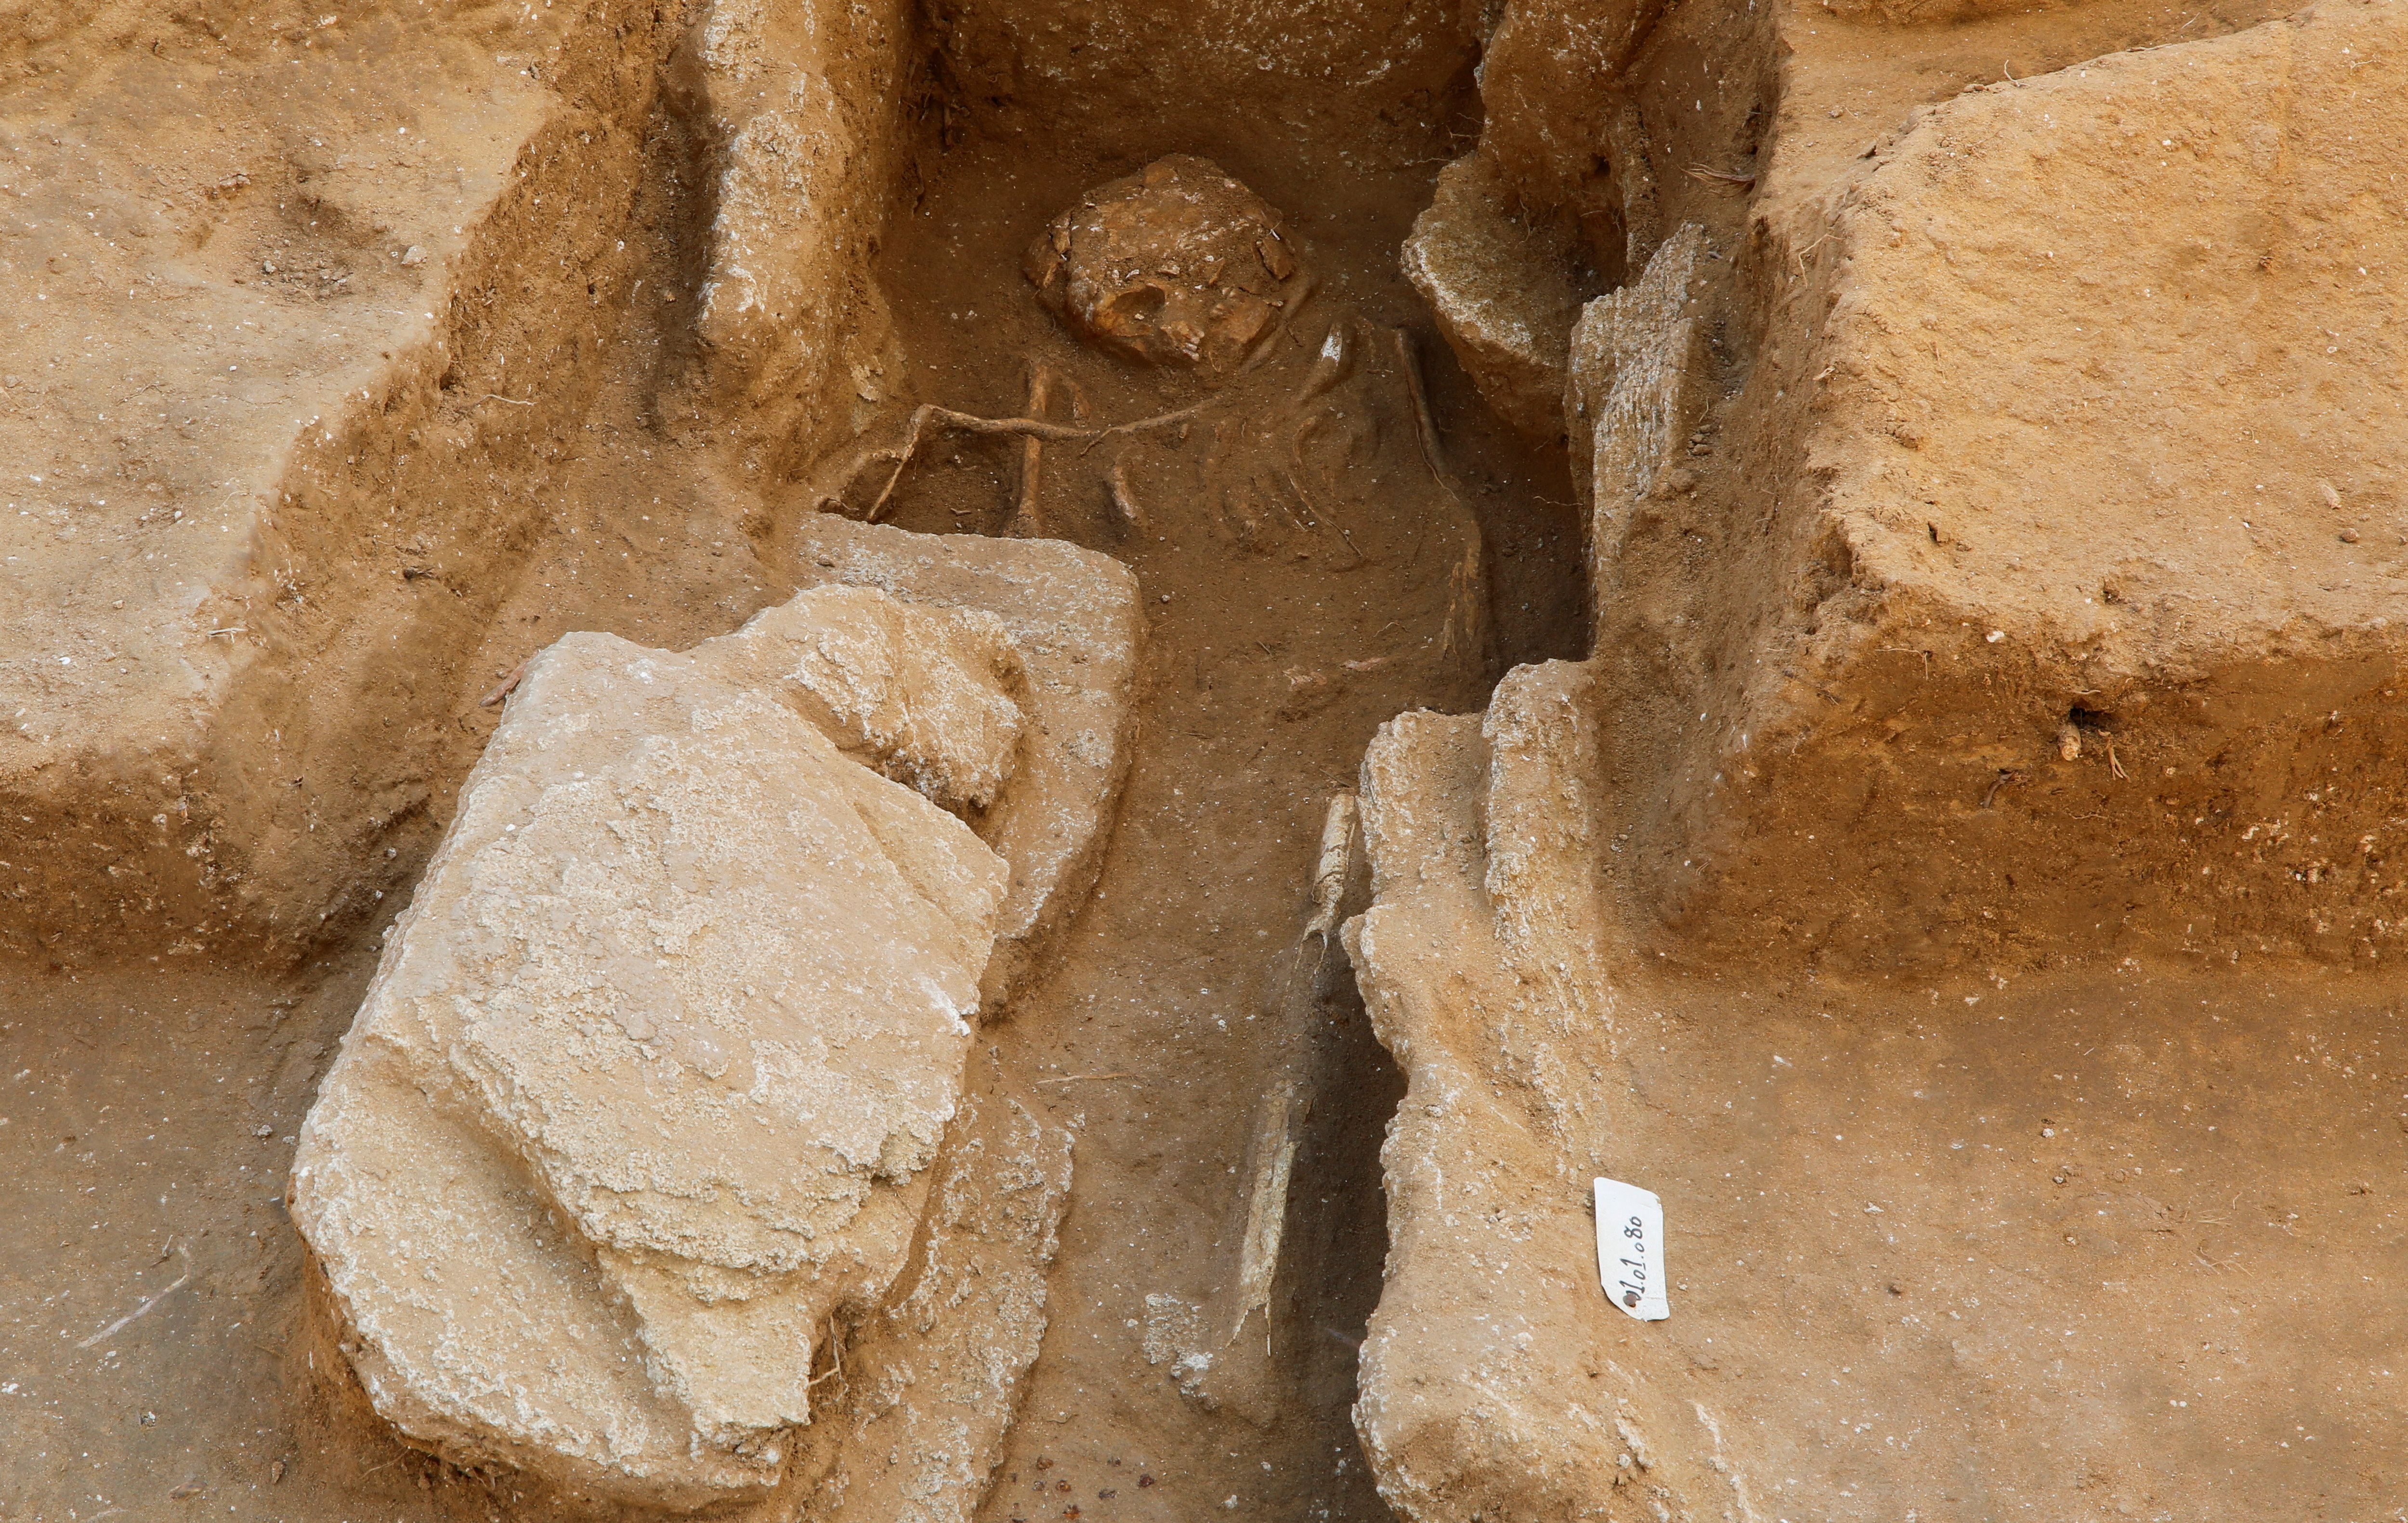 A view of remains found in a grave at the site of a 2000-year-old Roman cemetery, that had been discovered last year,  in northern Gaza Strip